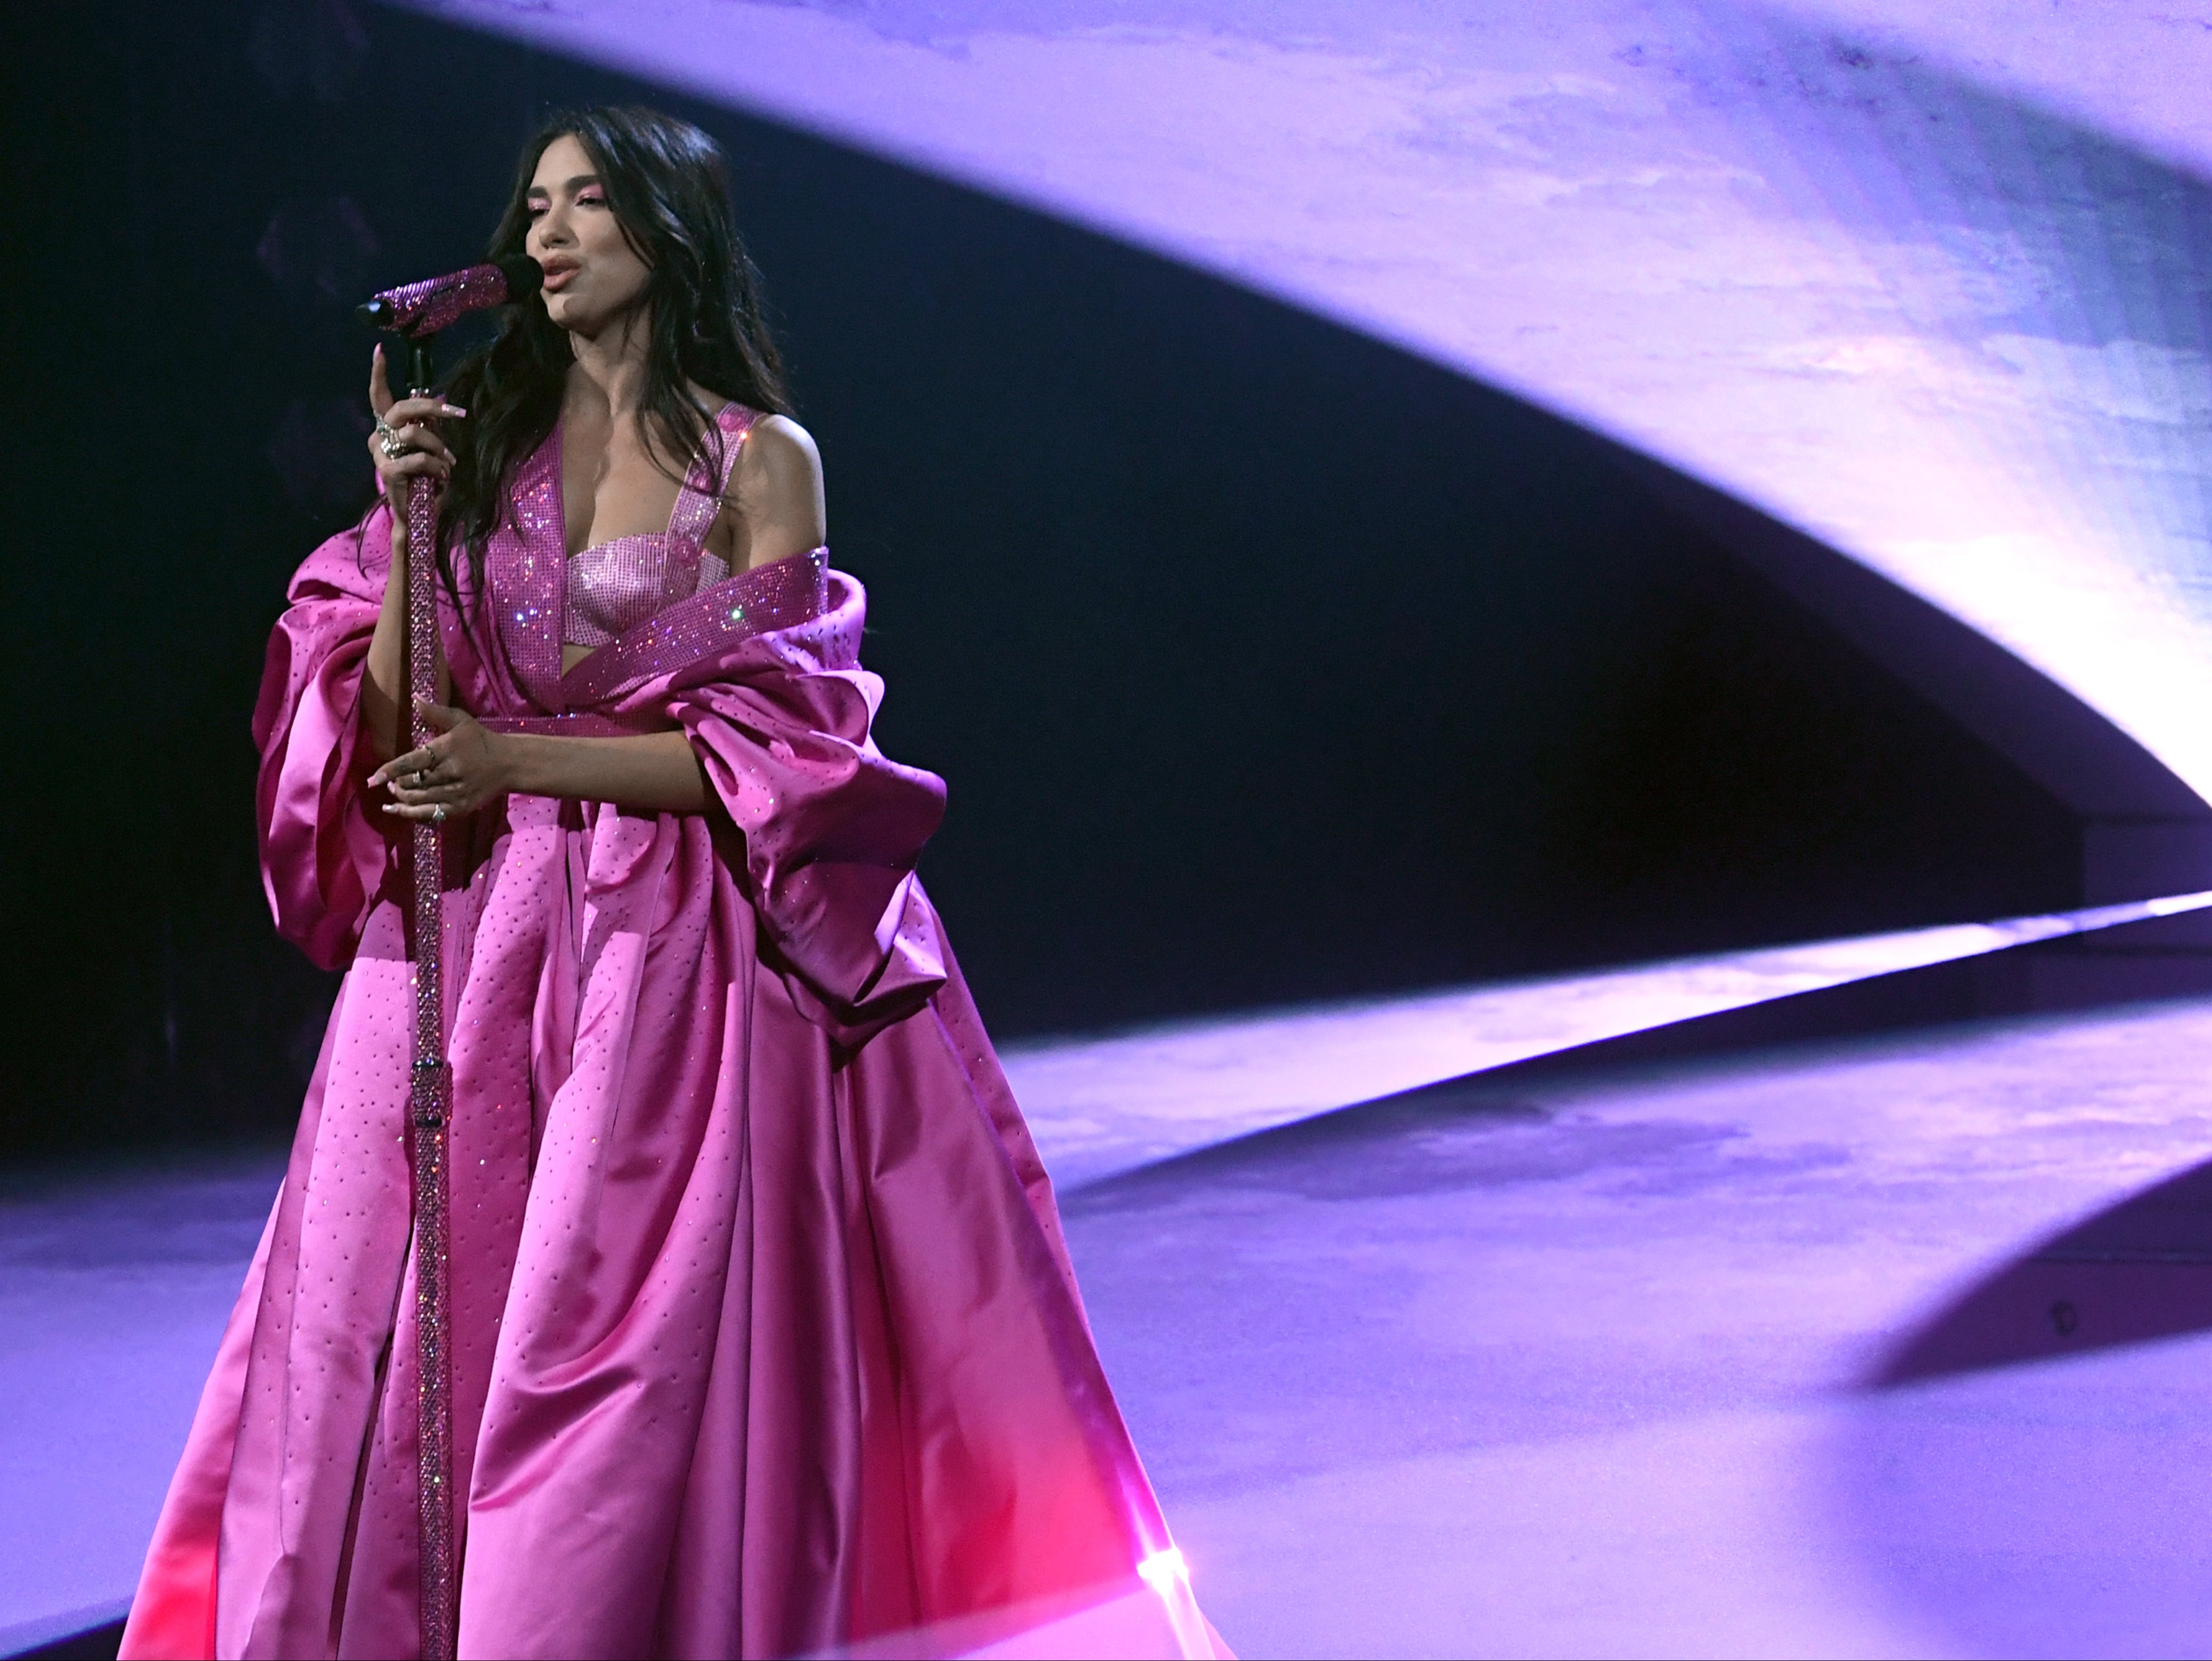 Dua Lipa will perform live at the Brit Awards ceremony